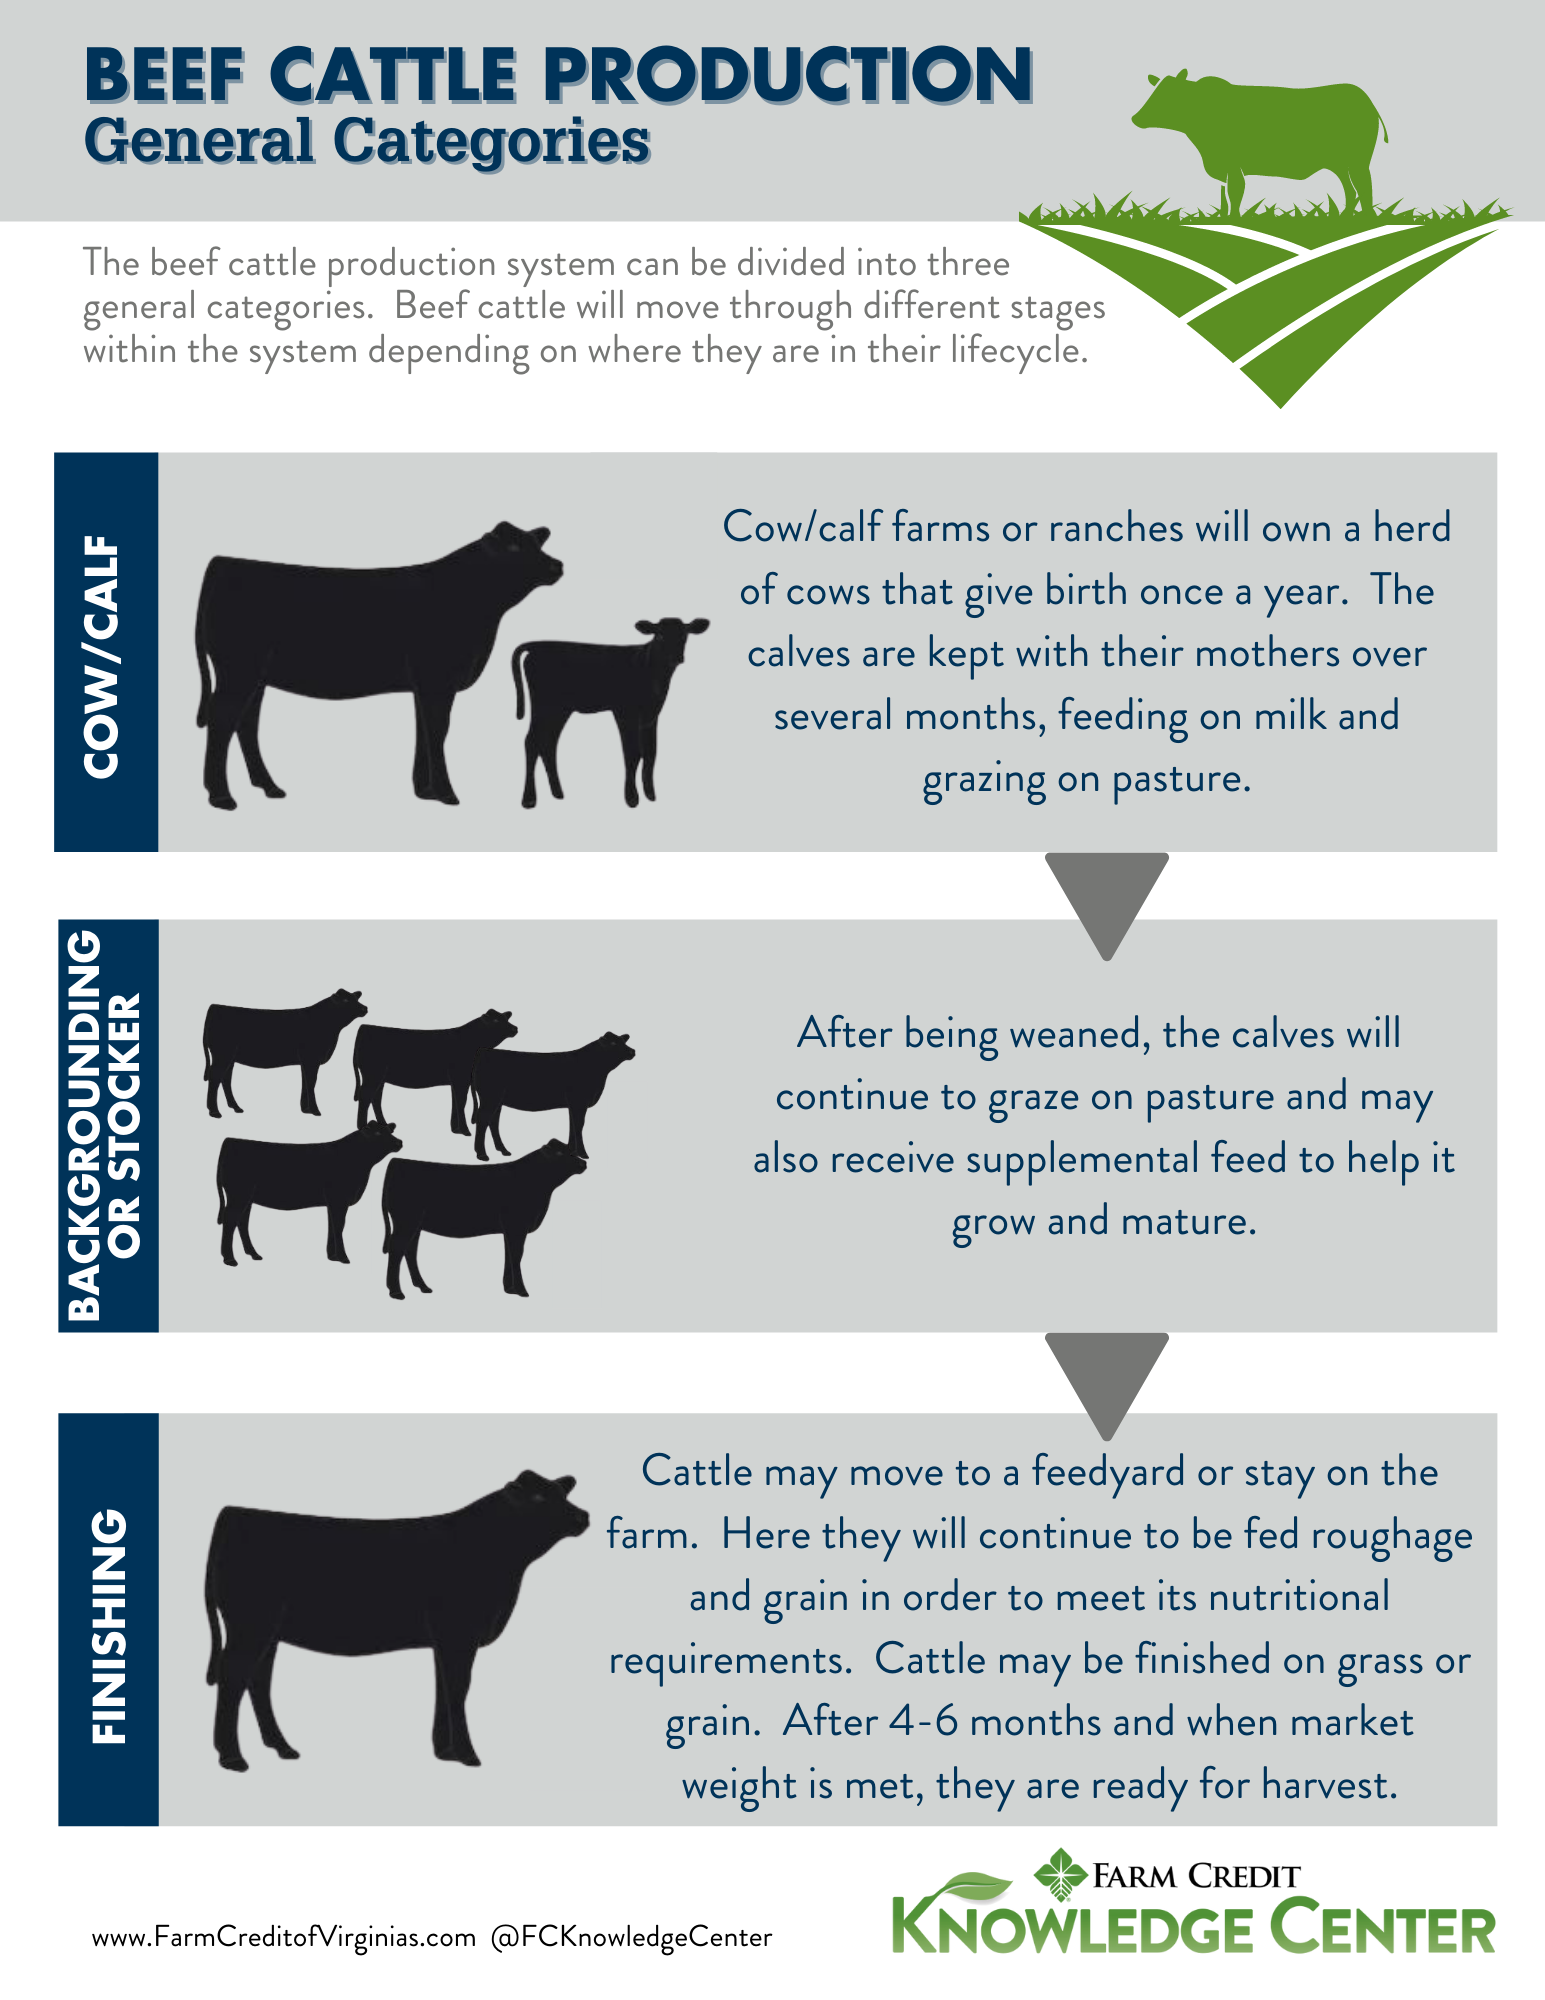 image infographic of animal agriculture, beef cattle production and the beef cattle lifecycle